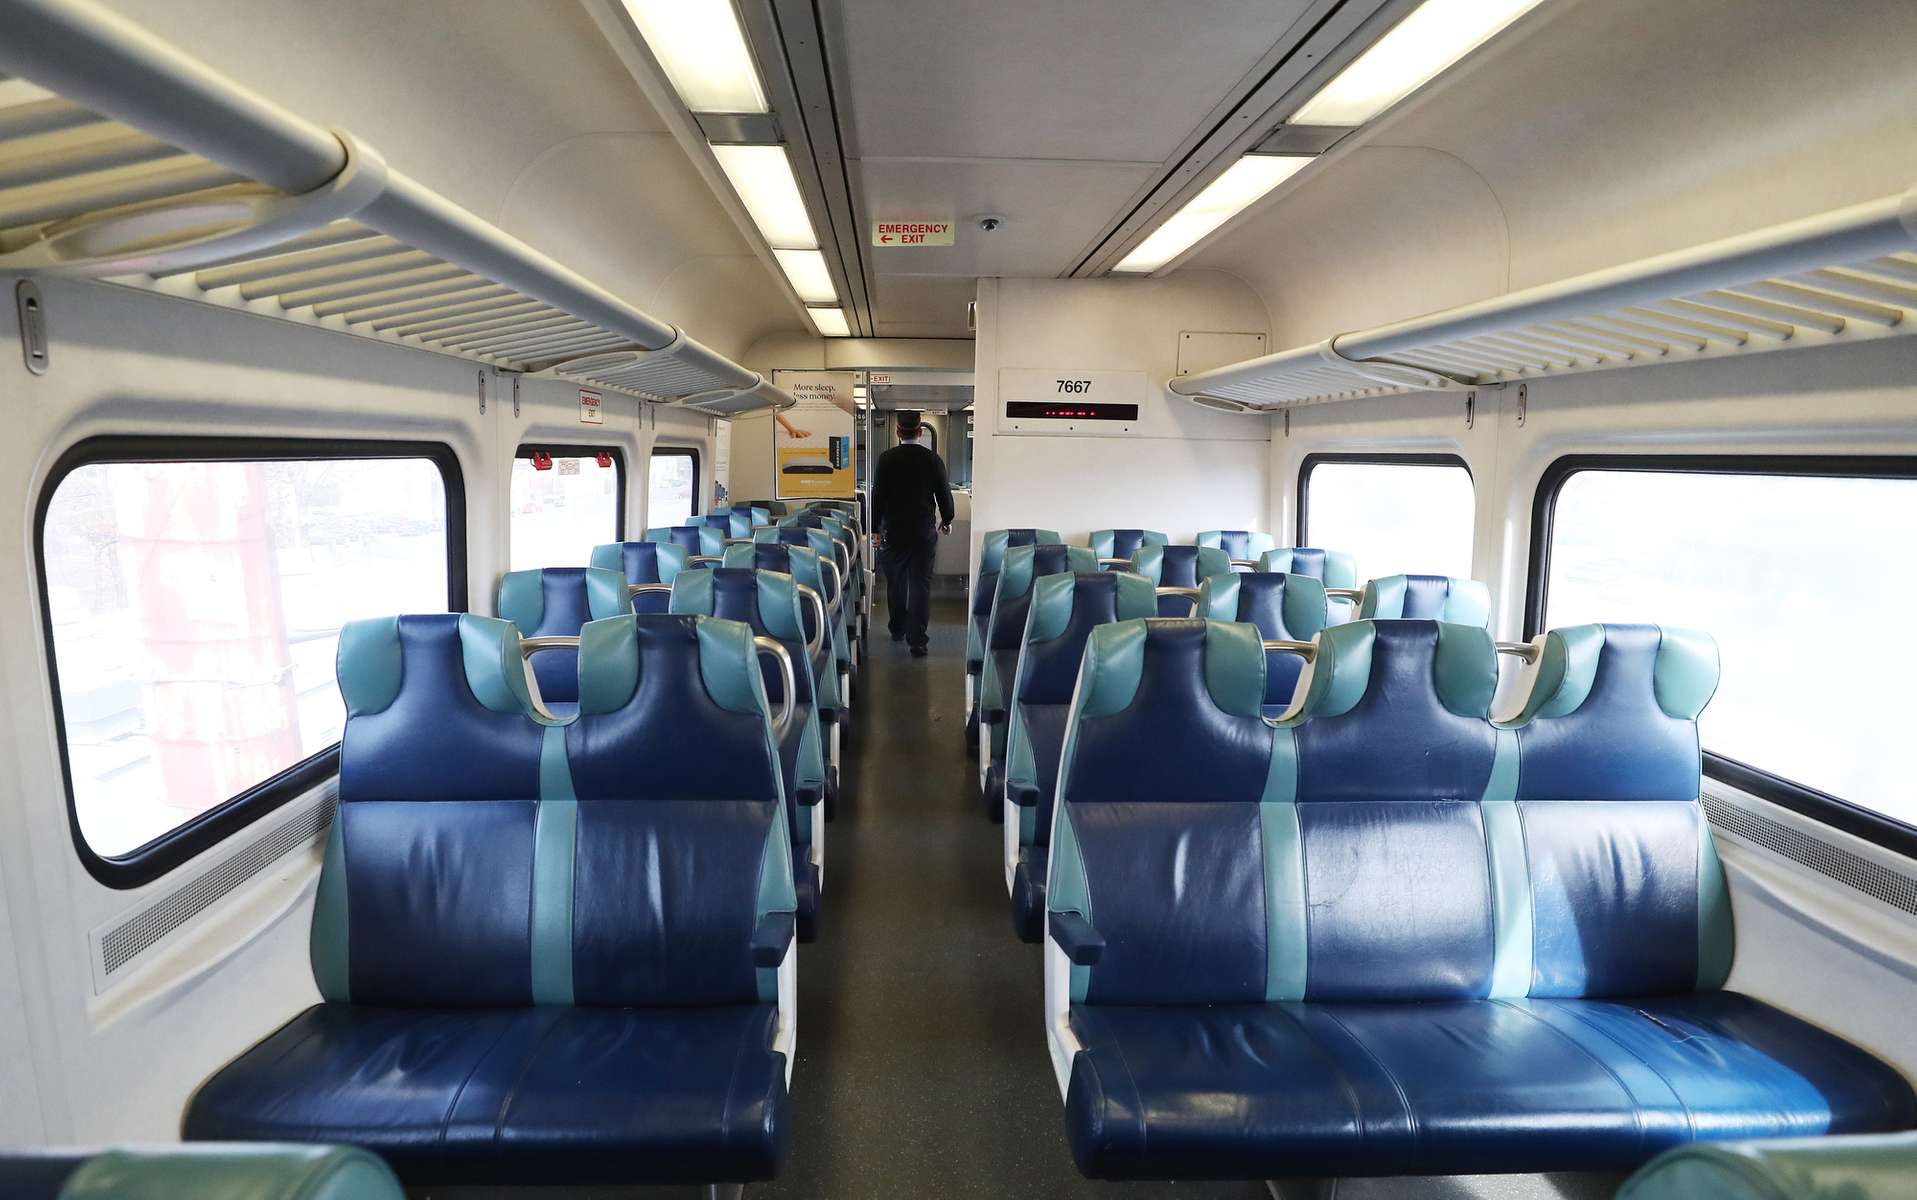 A view of an empty car on the Long Island Railroad on March 18, 2020 in Merrick, New York. The World Health Organization declared coronavirus (COVID-19) a global pandemic on March 11th.